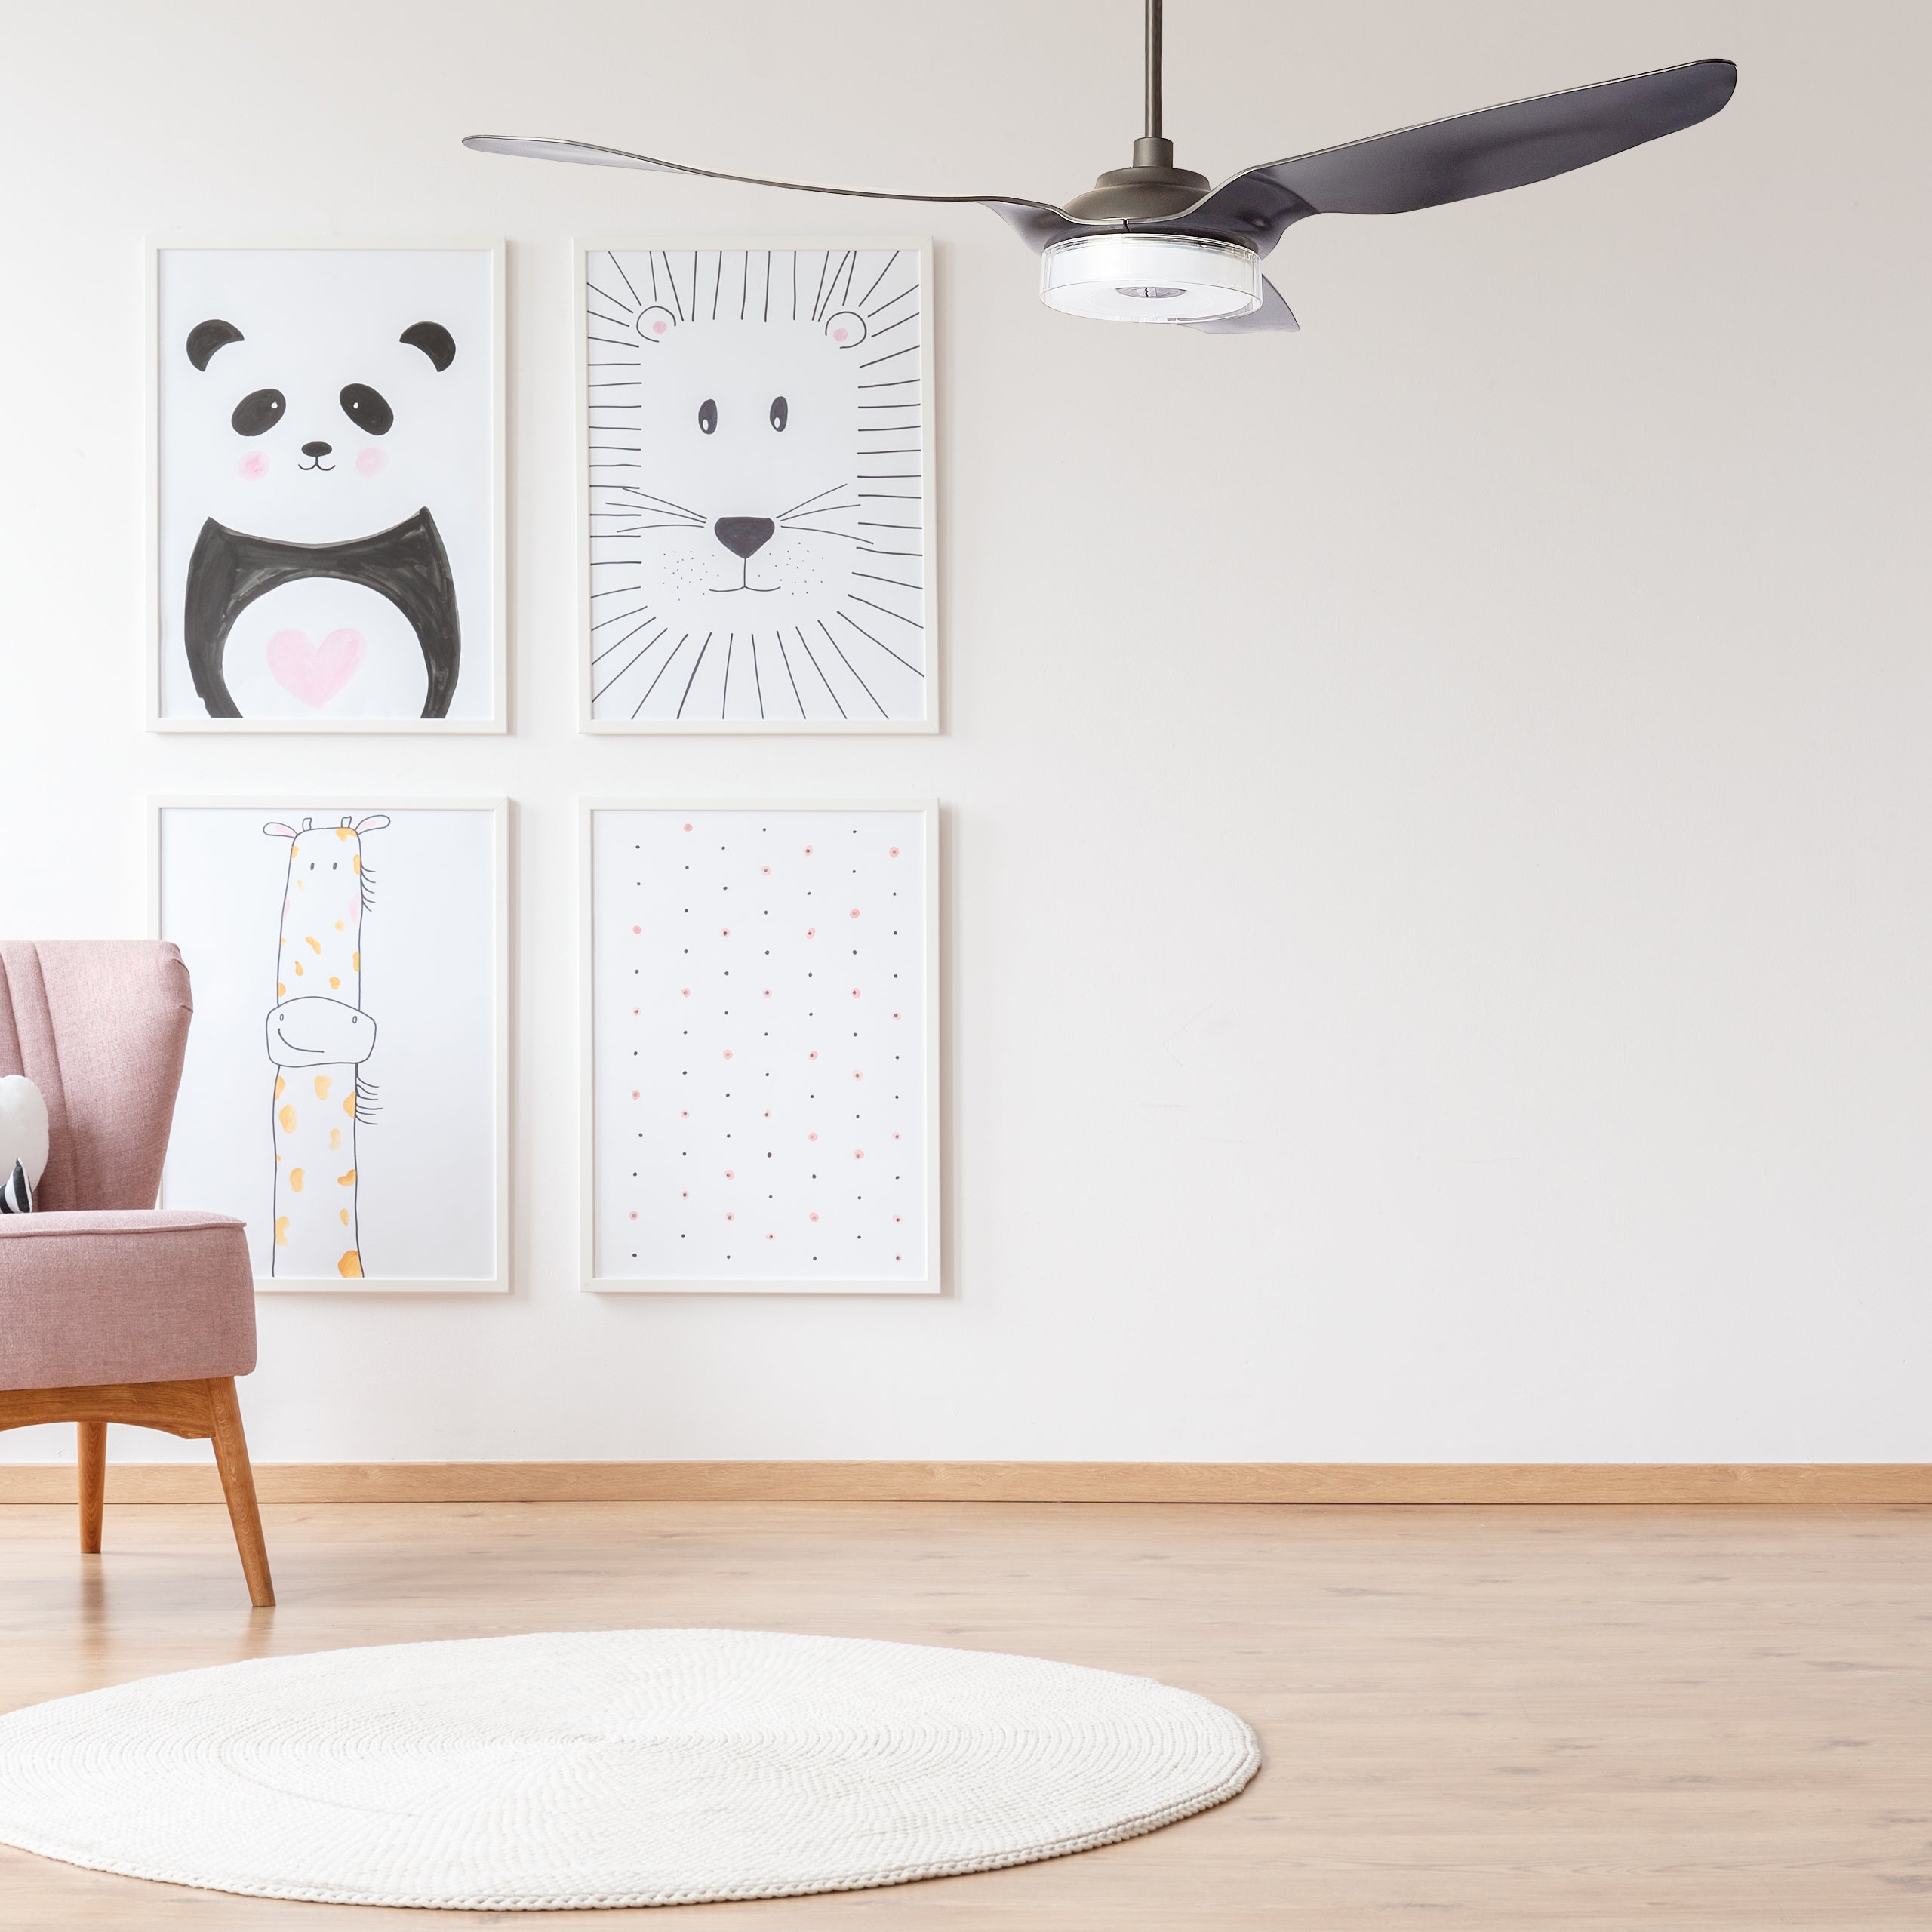 why you need ceiling fan for your kids' room